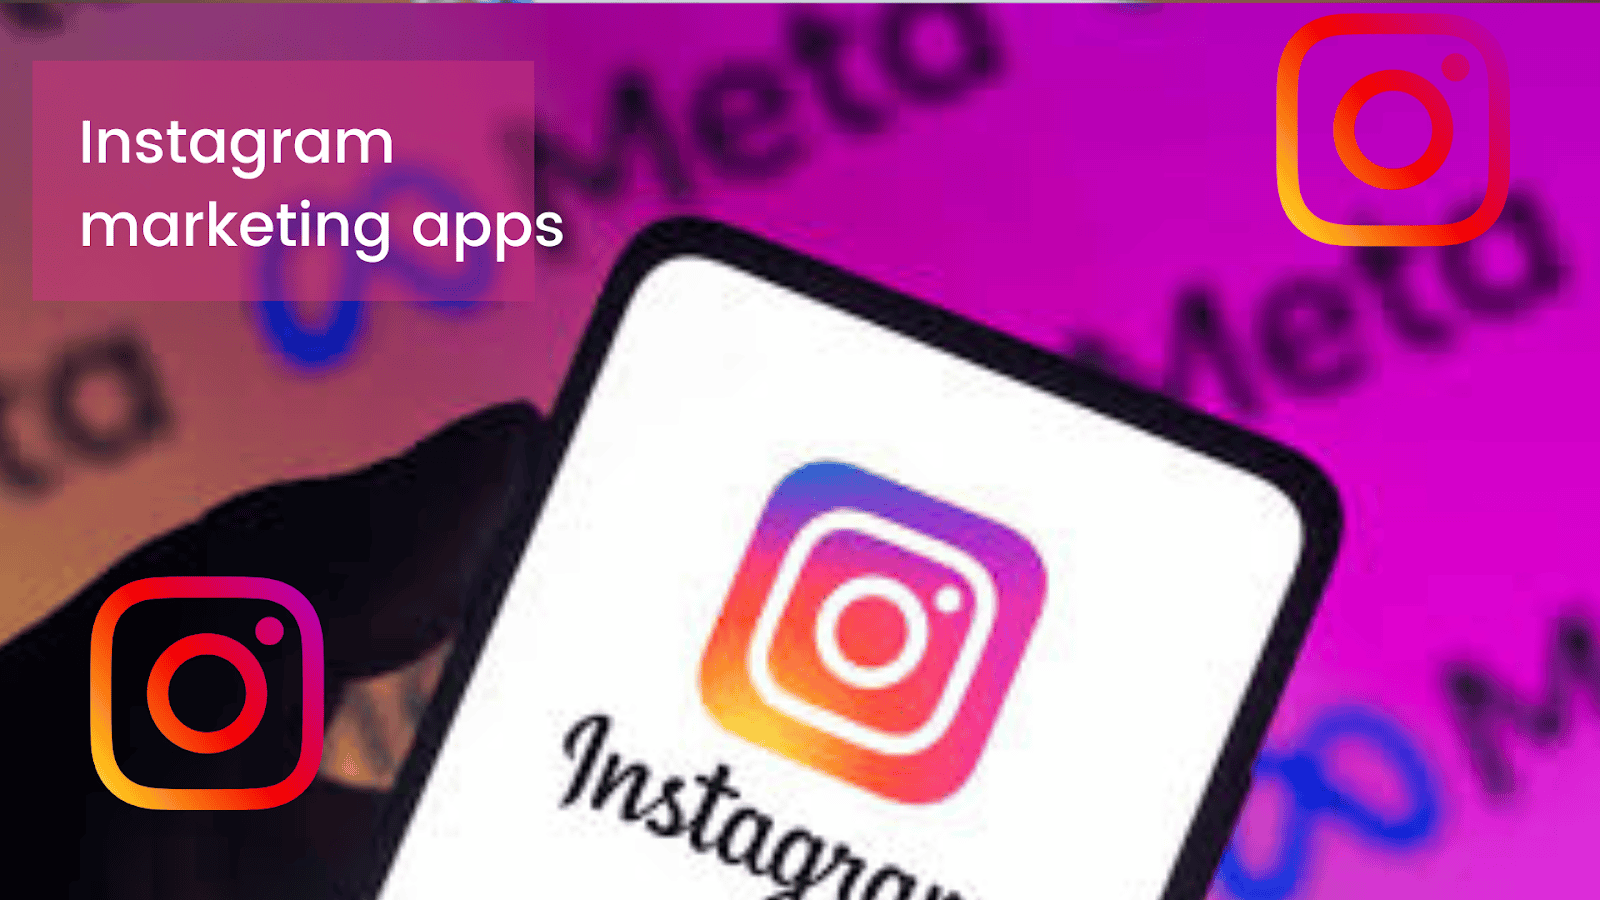 image 125 What Is Instagram Marketing Apps?